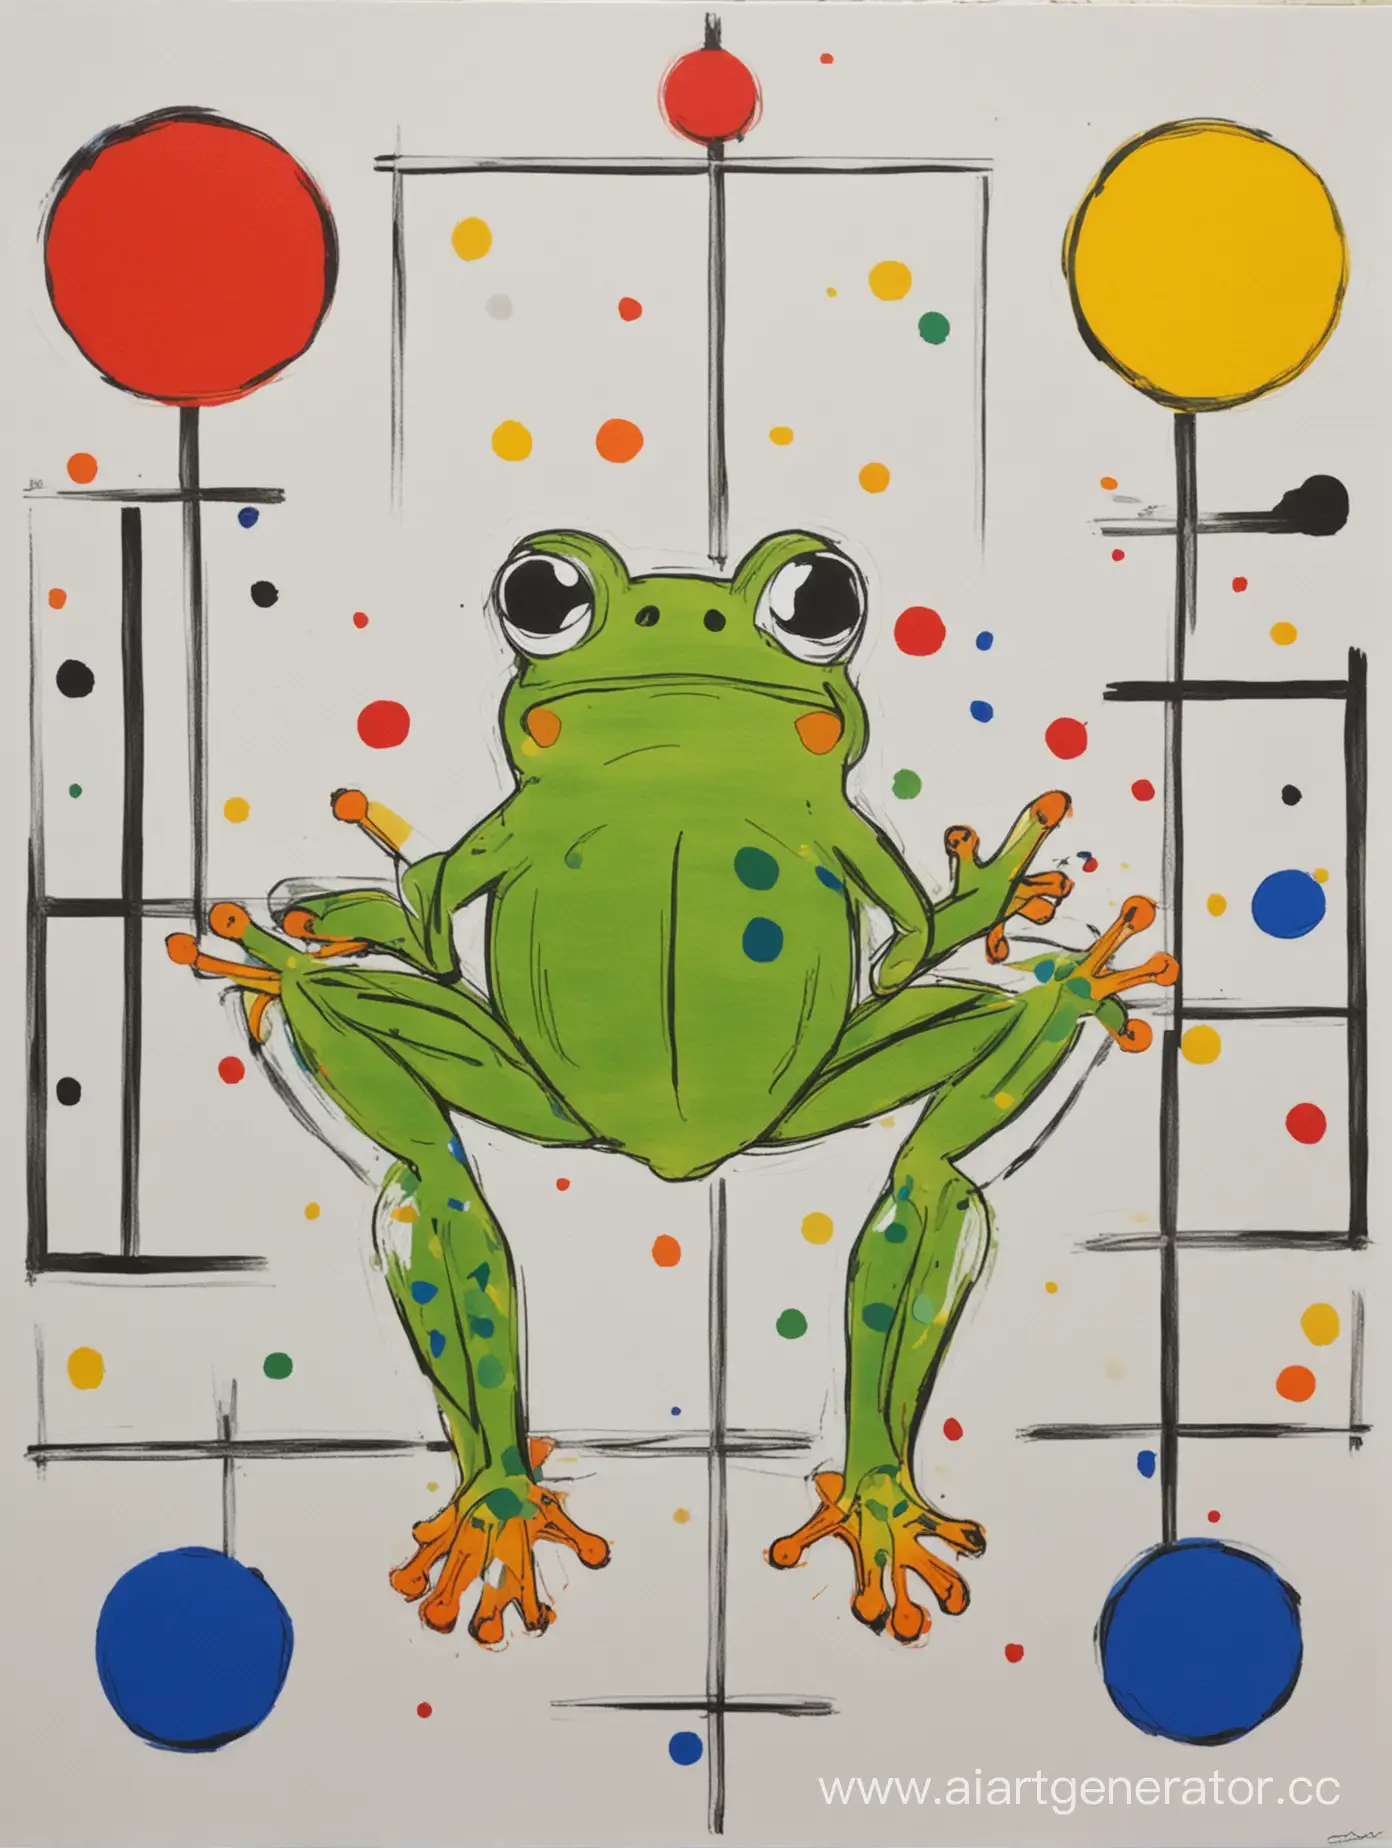 Abstract-Frog-Art-Constructivist-Style-Inspired-by-Mondrian-and-Kusama